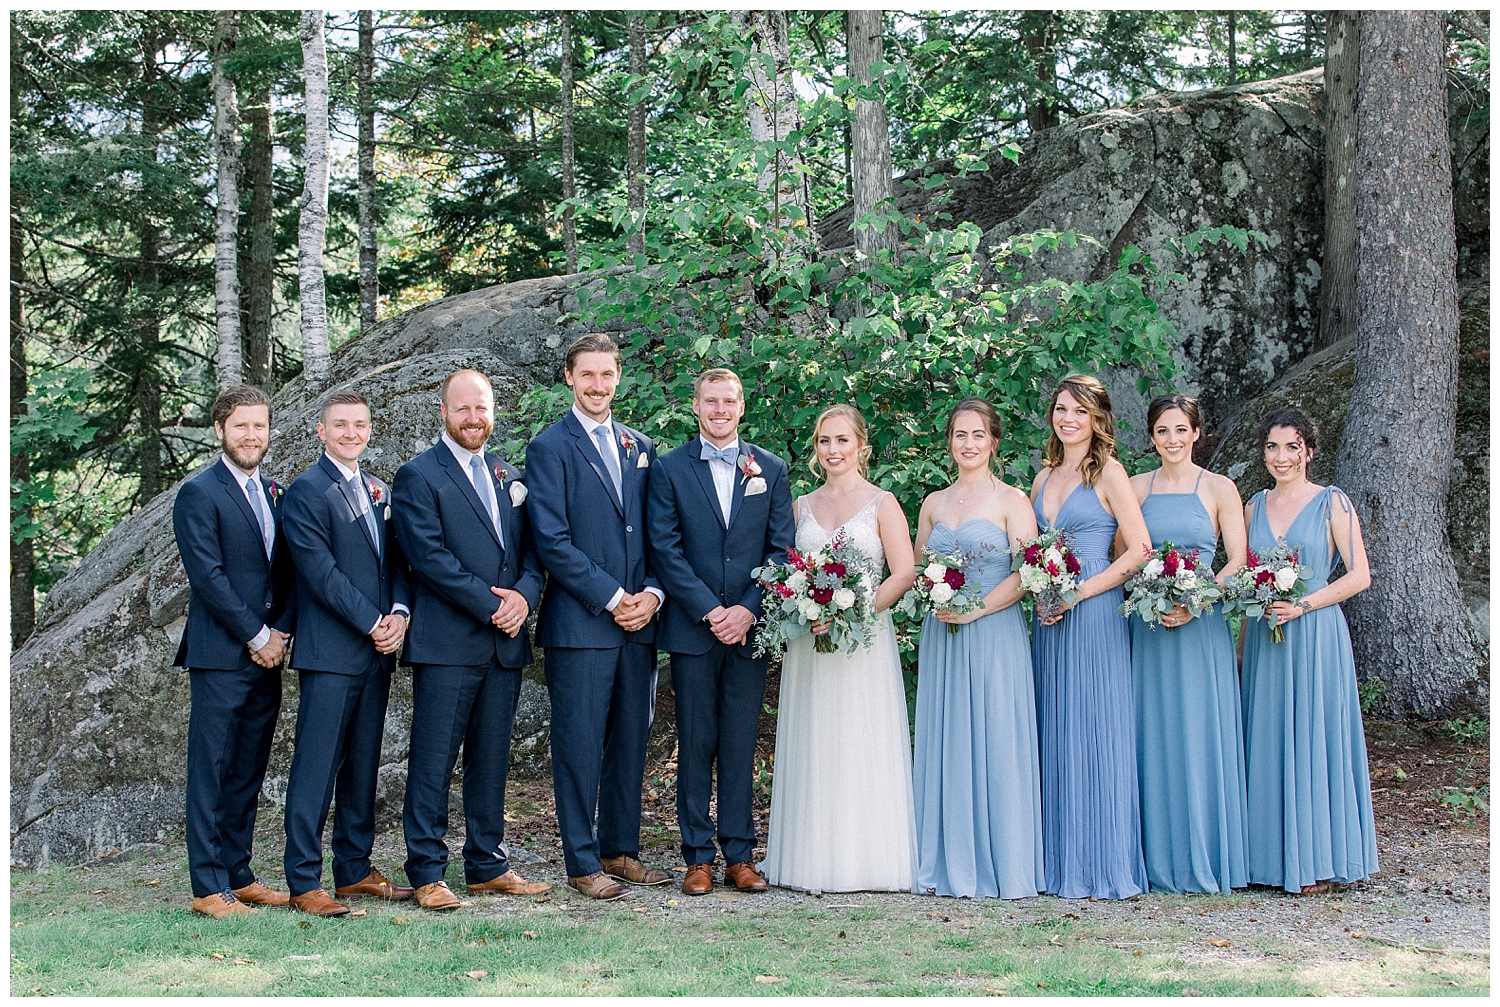 Bridal party at the Outdoor Adventure Center at a Sugarloaf Mountain Resort Wedding in Maine, photos by Halie Olszowy.